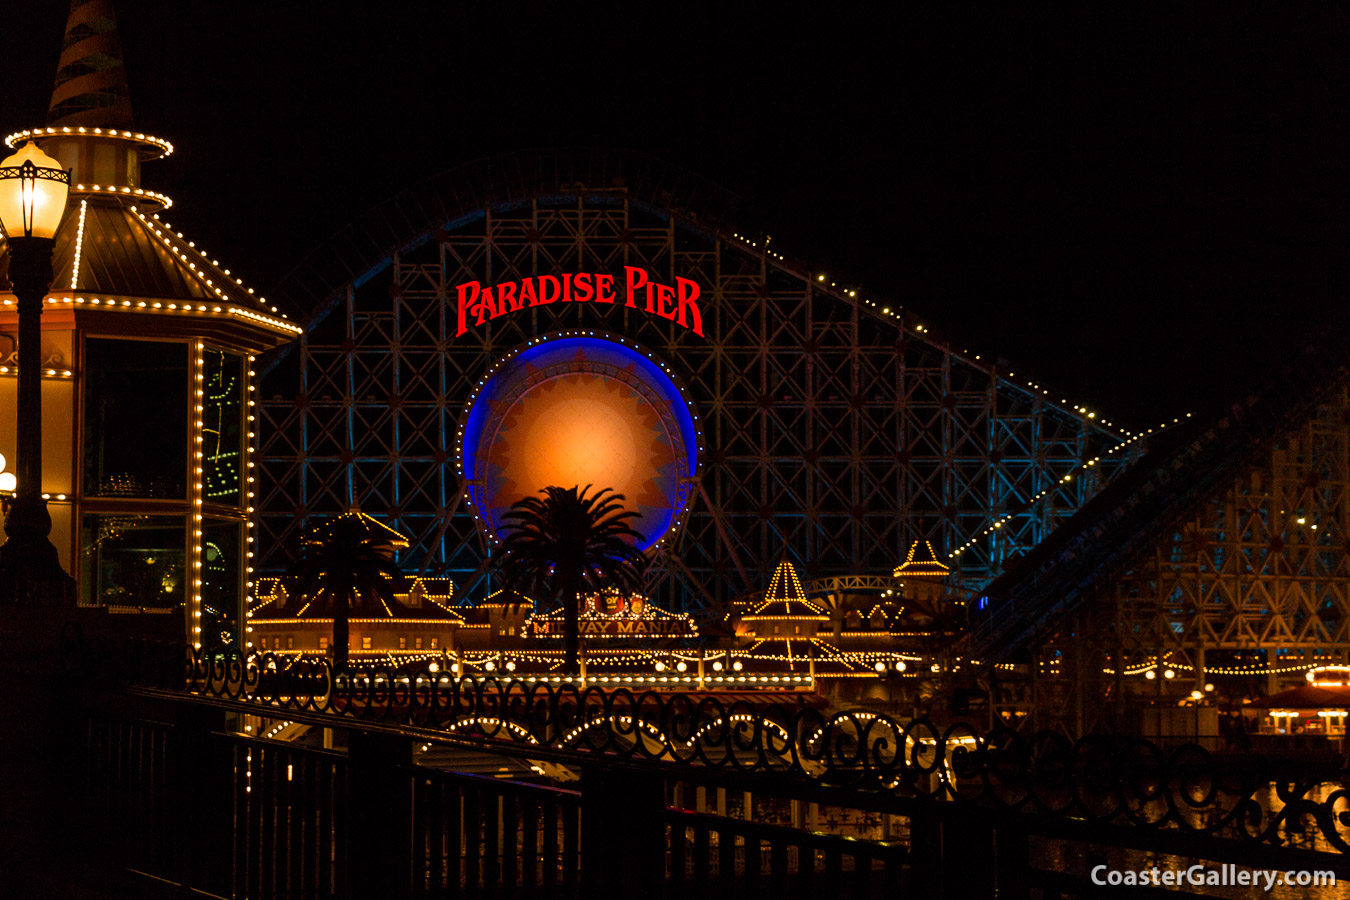 Pictures of the scary roller coaster at Disney's California Adventure Park